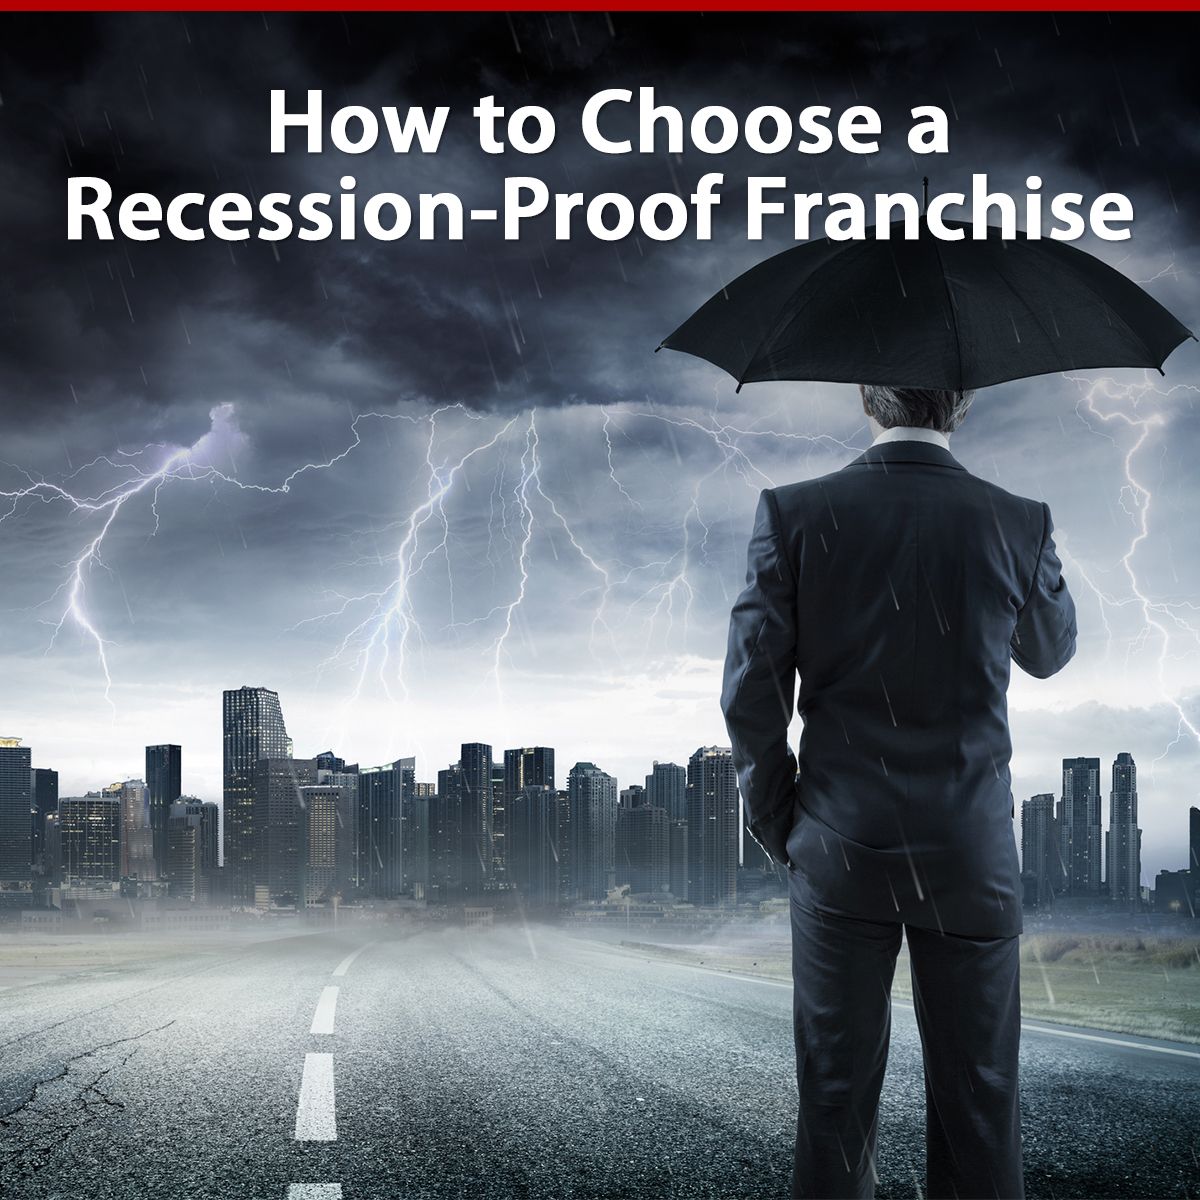 How to Choose a Recession-Proof Franchise